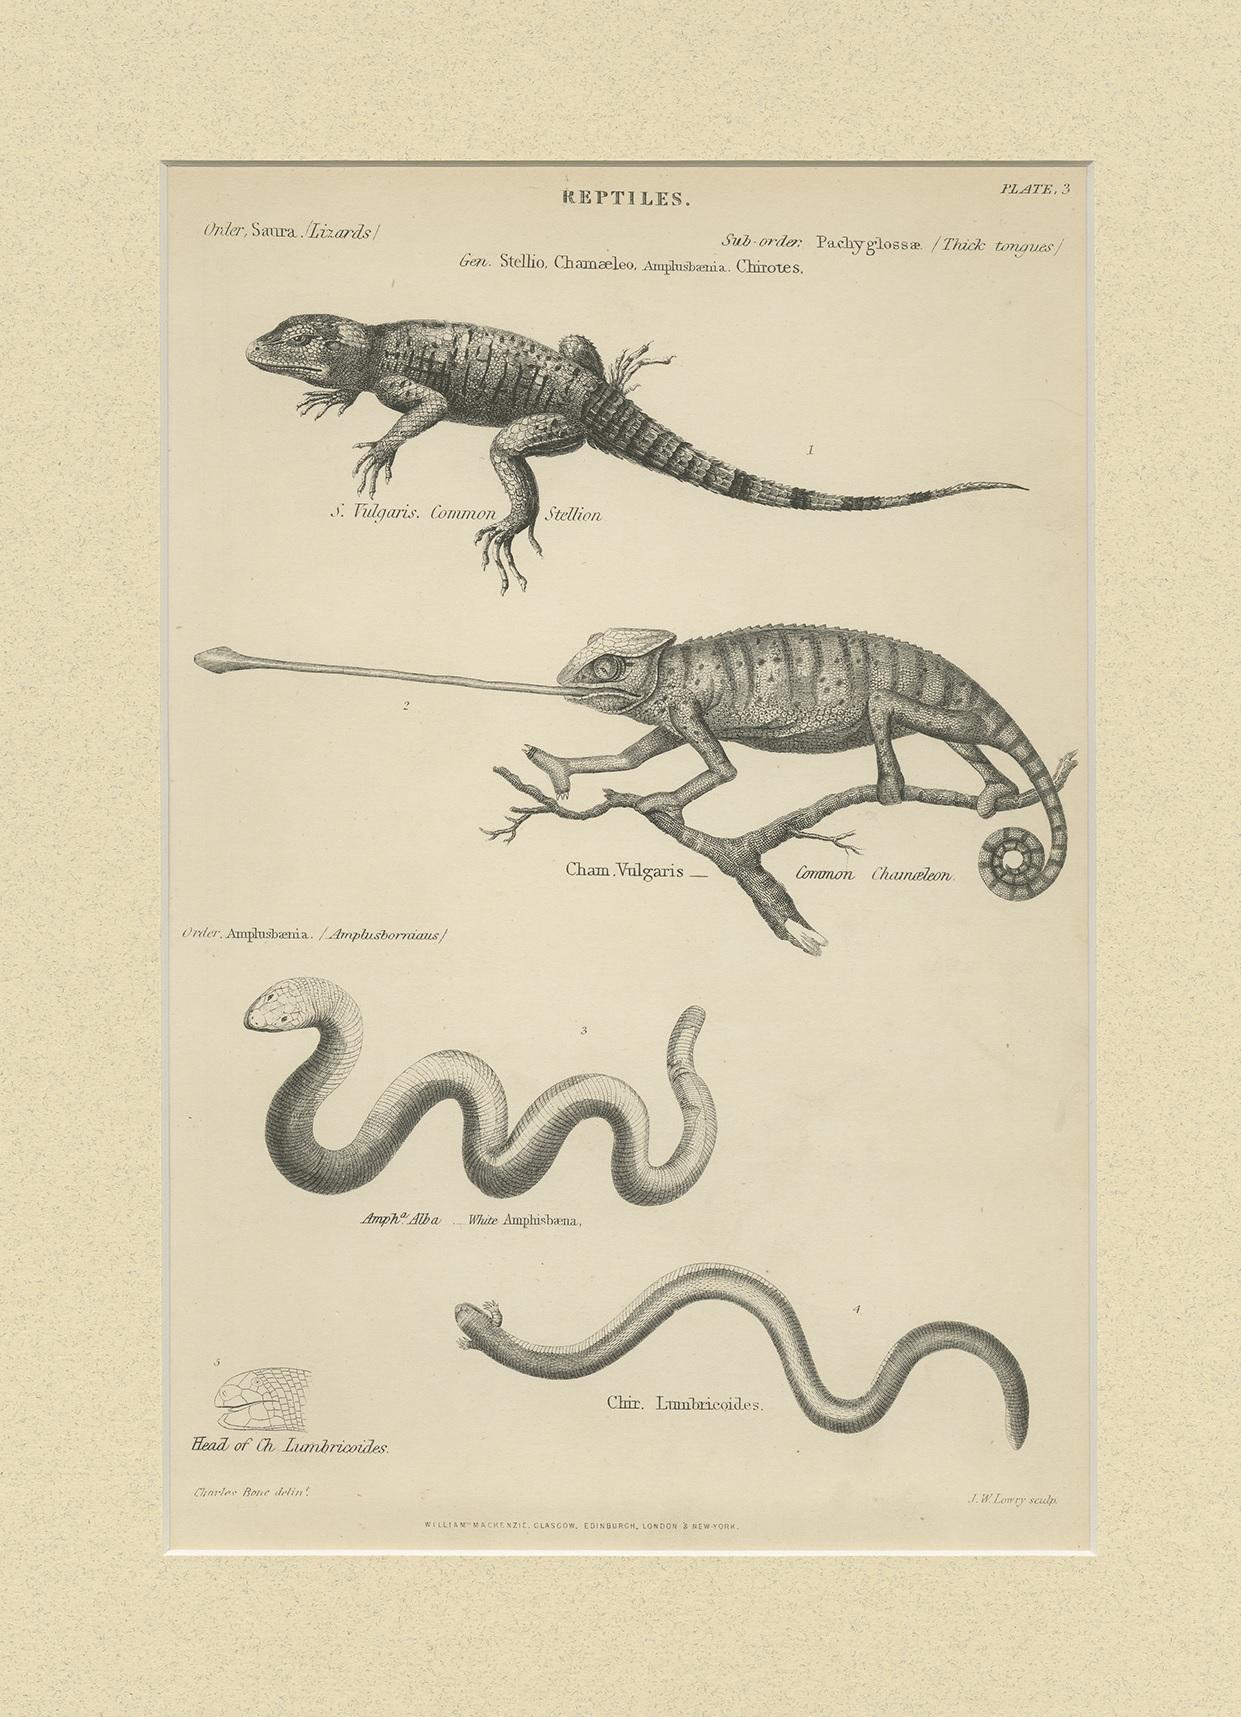 Antique print titled 'Reptiles'. Print of various reptiles (lizards) including the chameleon. This print originates from 'The Museum of Natural History' by John Richardson. Published by William Mackenzie.

Passepartout included.